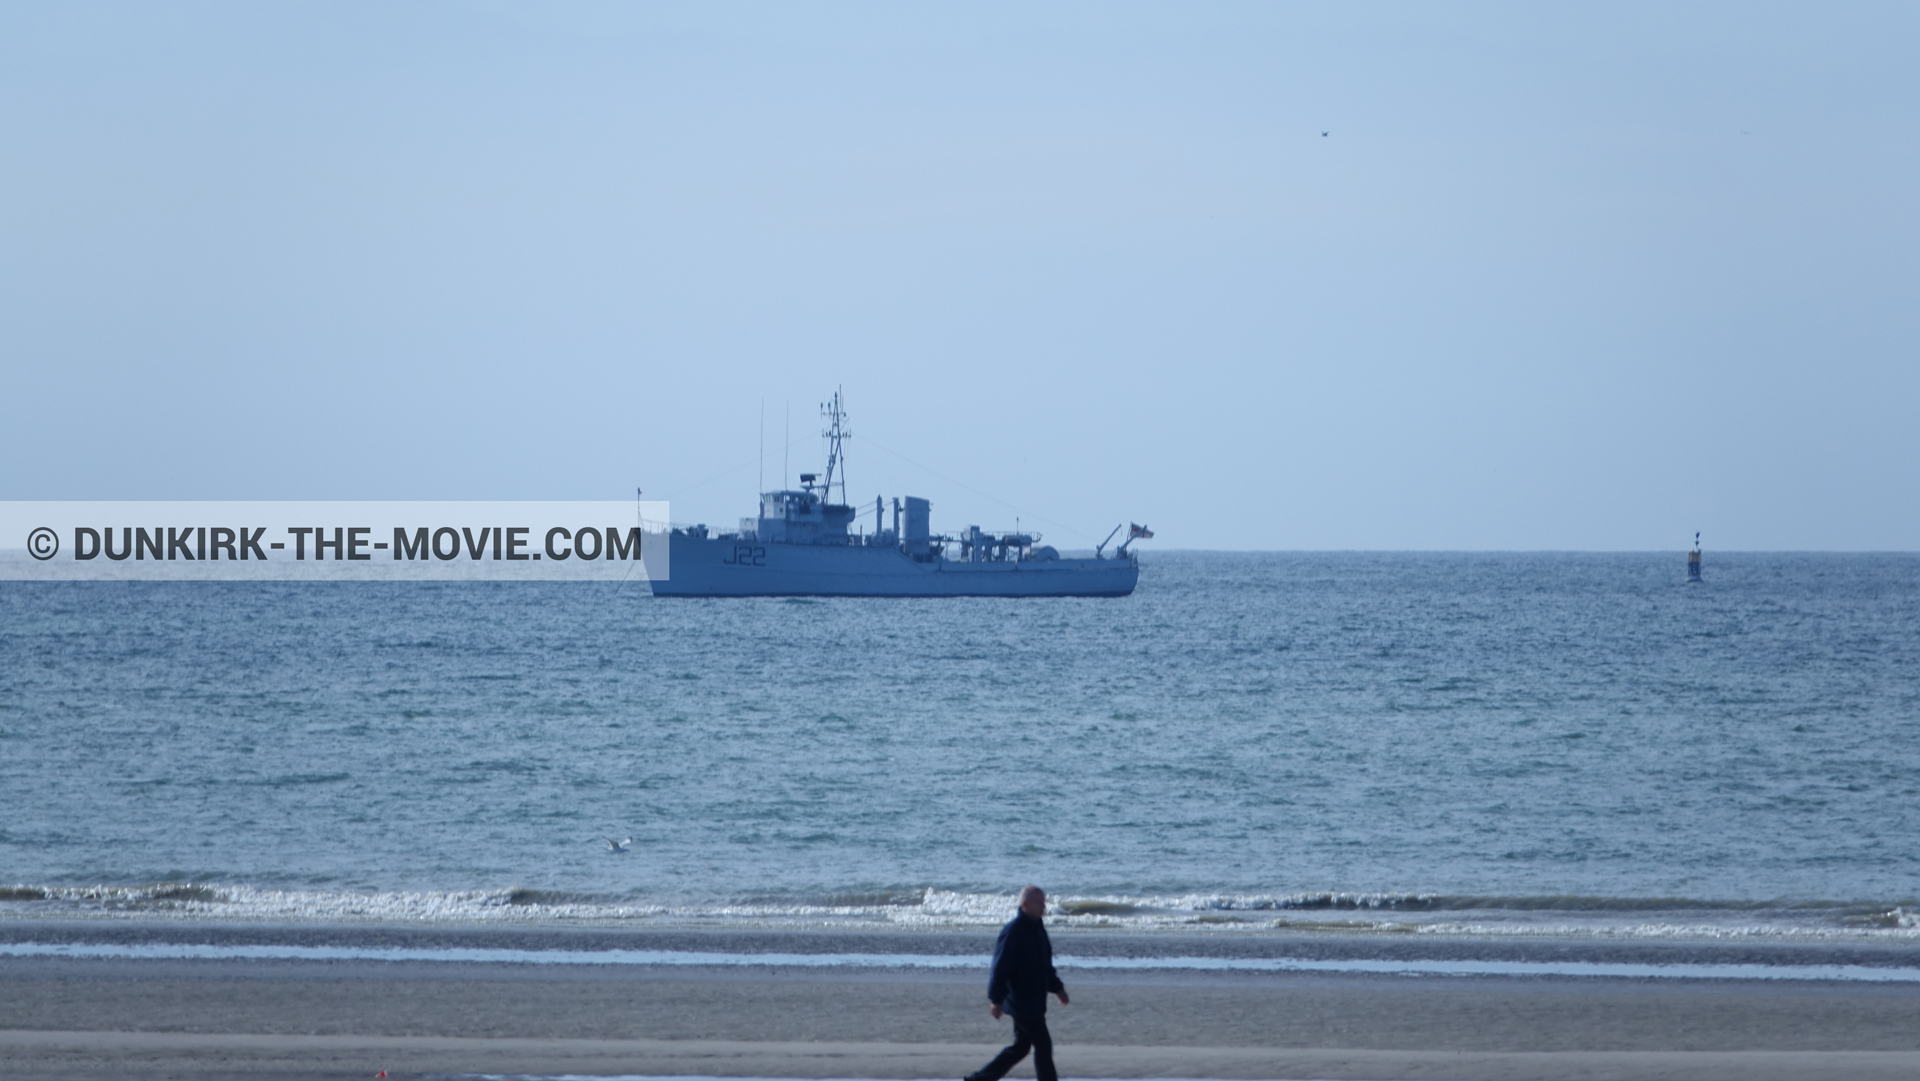 Picture with boat, beach,  from behind the scene of the Dunkirk movie by Nolan